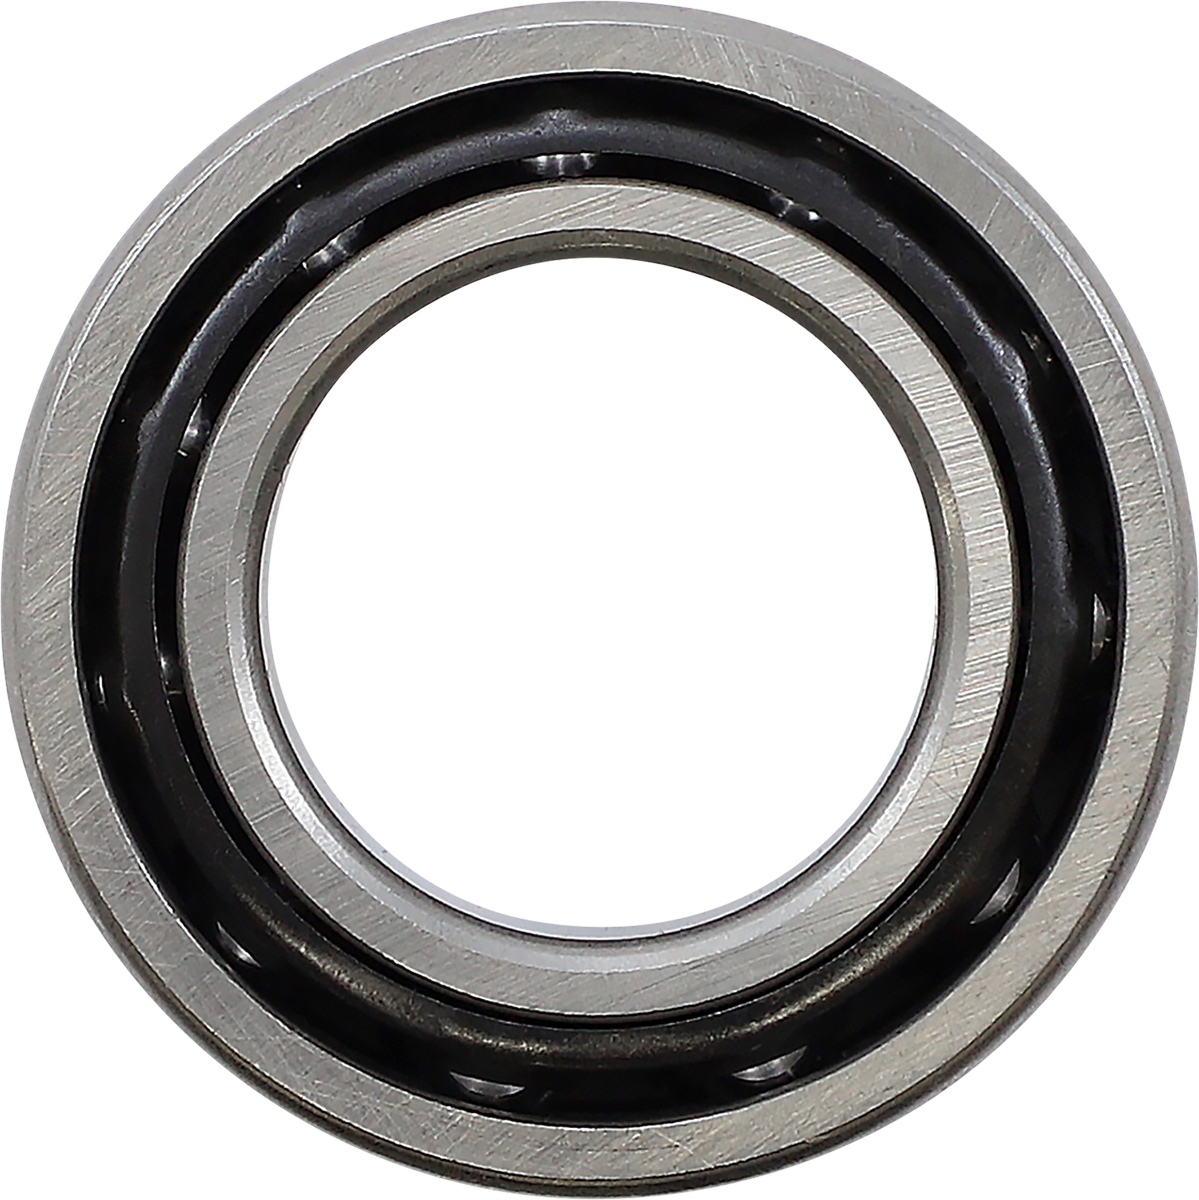 Eastern Motorcycle Parts Replacement 5/16" Ball Bearing 2017-21 Touring Softail